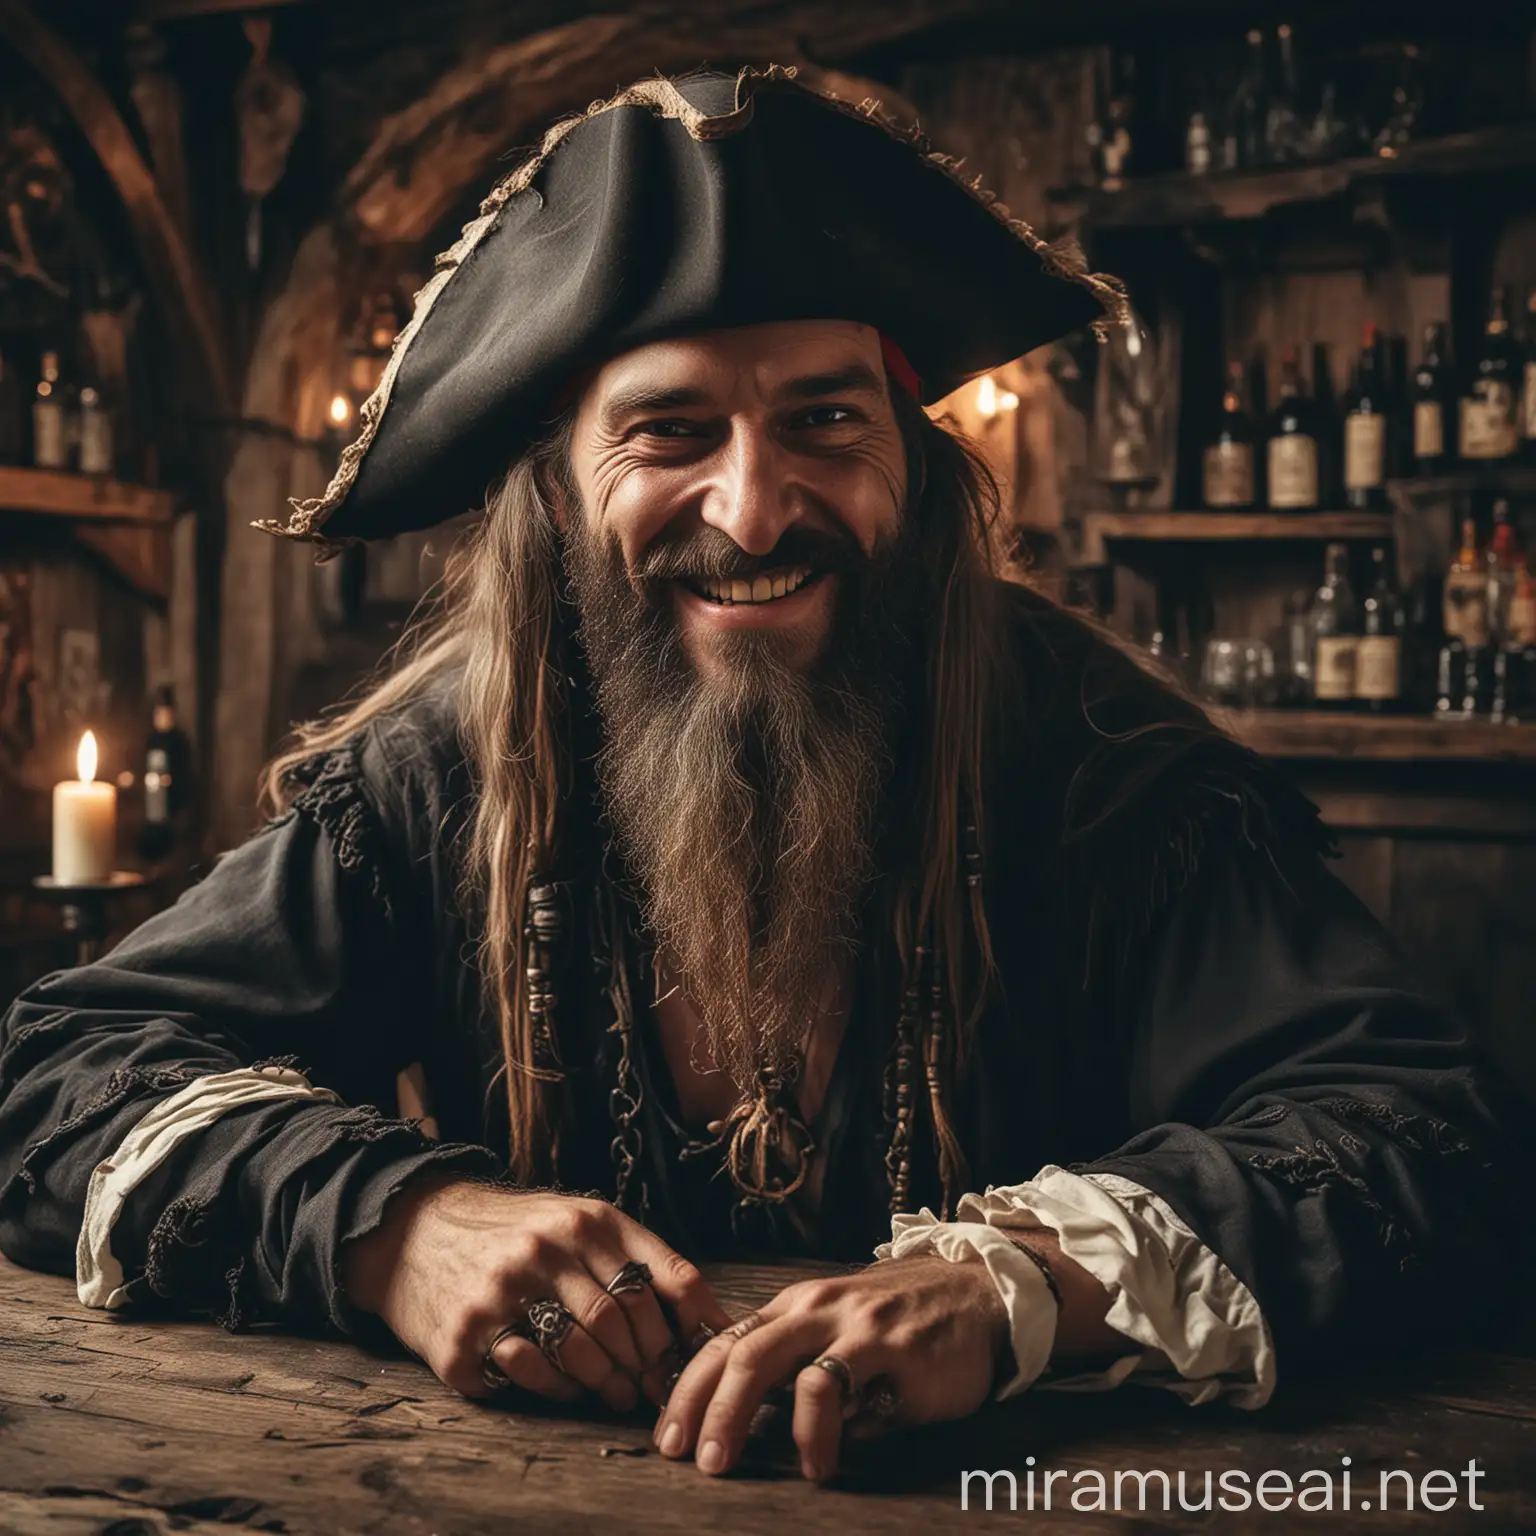 Cheerful Pirate and Grim Reaper Enjoy Wine and Rum in Medieval Tavern